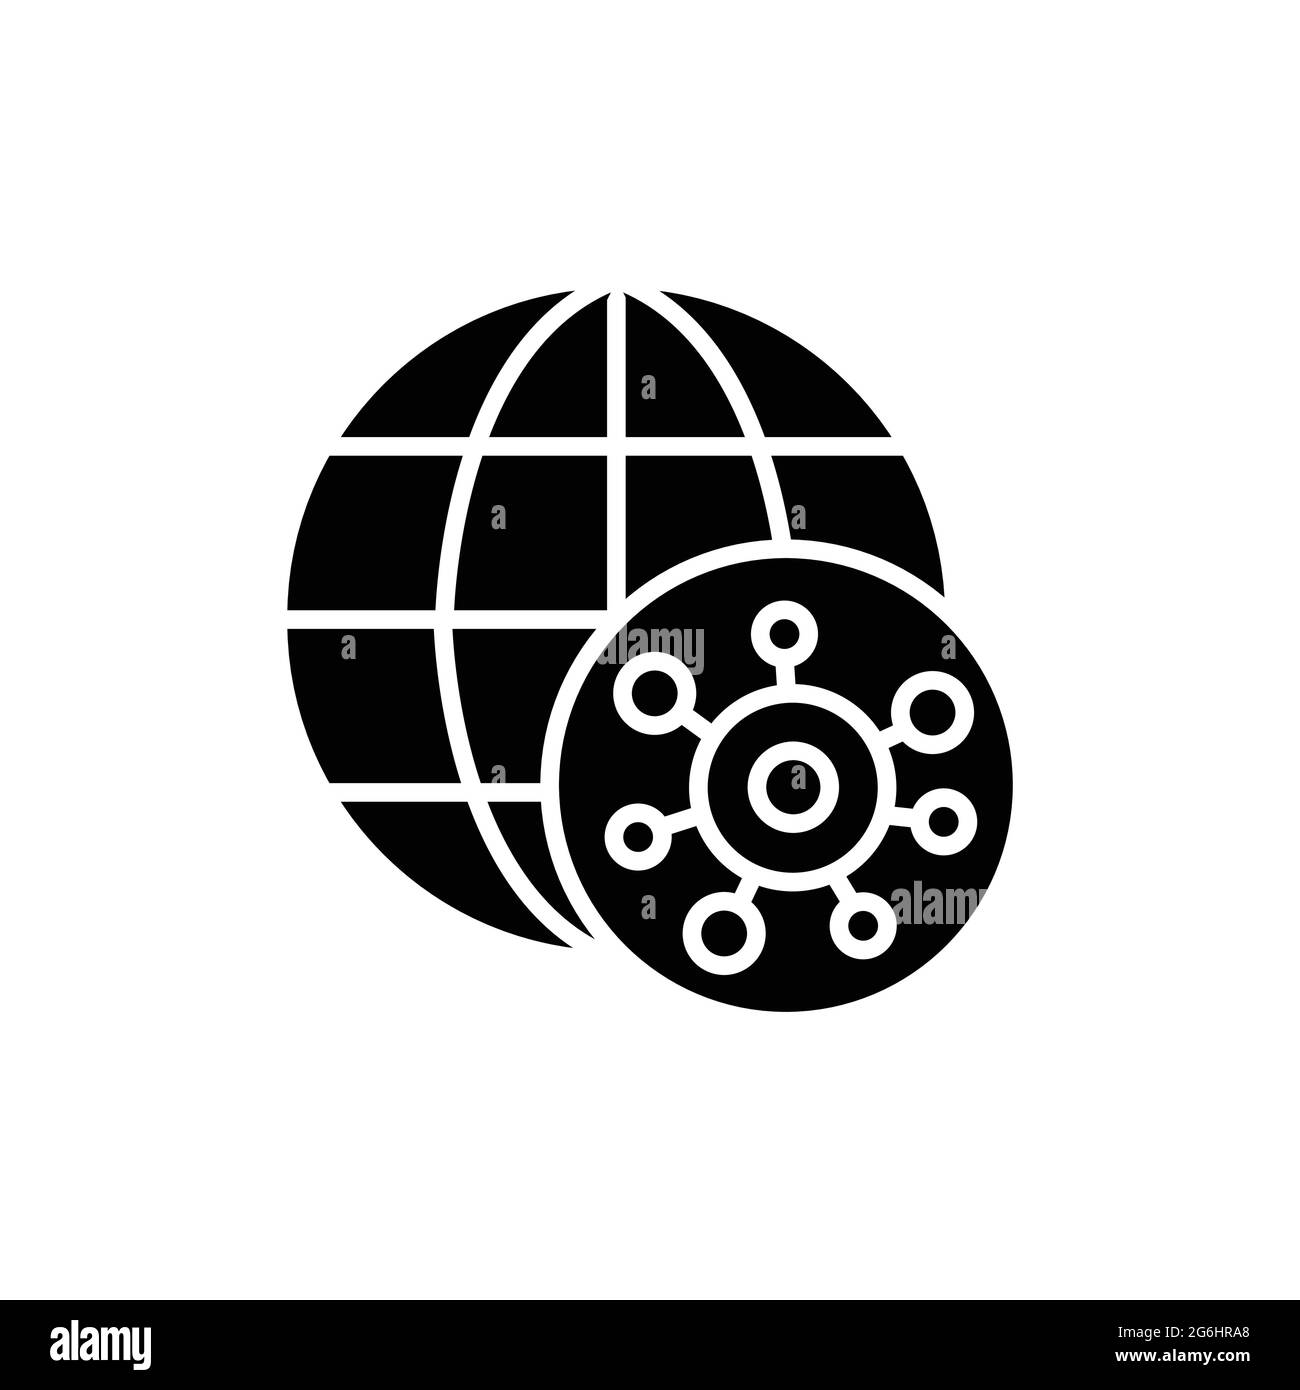 Global epidemic color line icon. Isolated vector element. Outline pictogram for web page, mobile app, promo Stock Vector